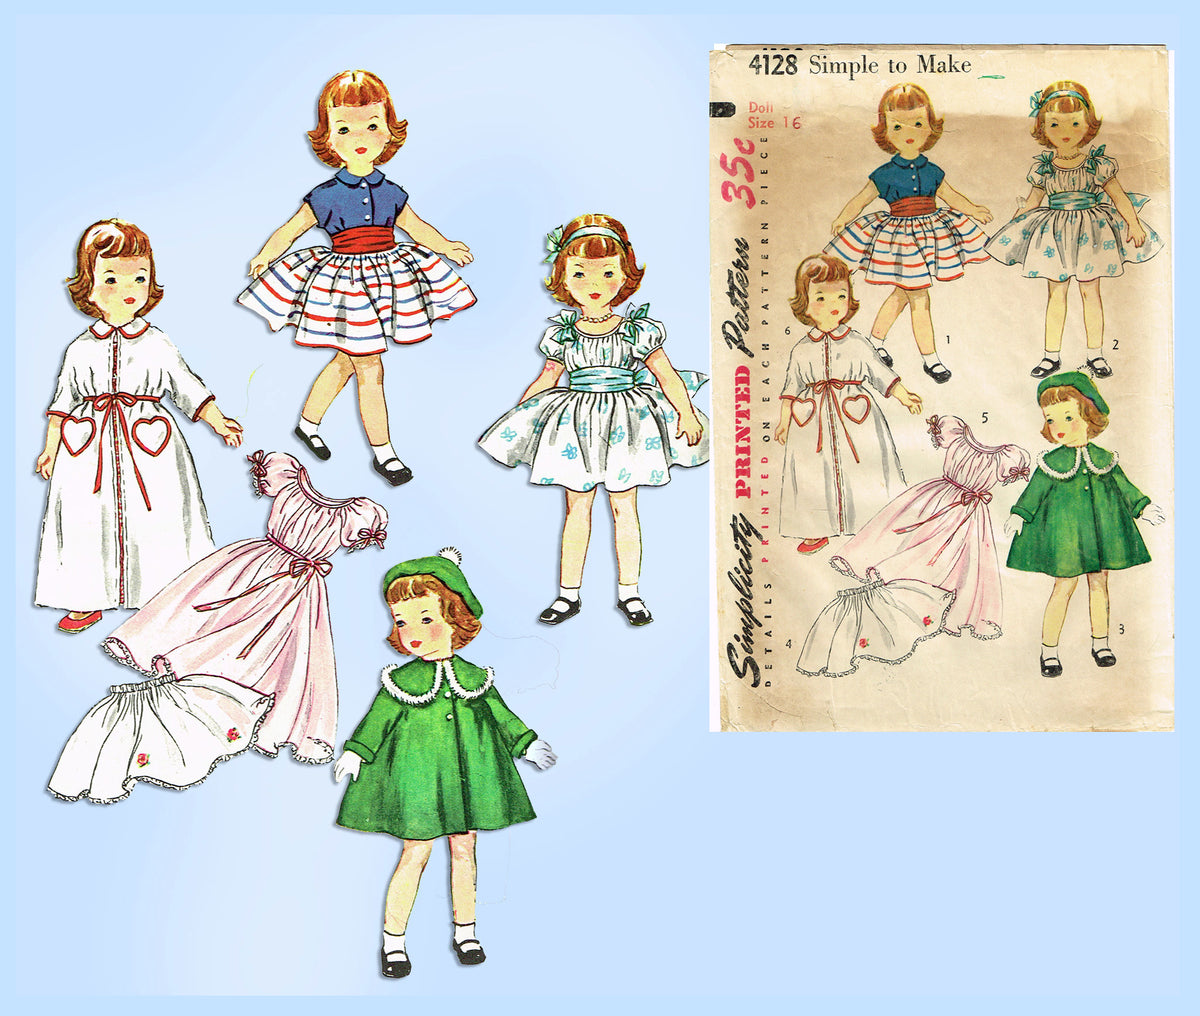 1950's Style 4-Way Wardrobe for 18 Dolls - PDF Sewing Pattern —  MyAngieGirl Doll Clothes and Sewing Patterns